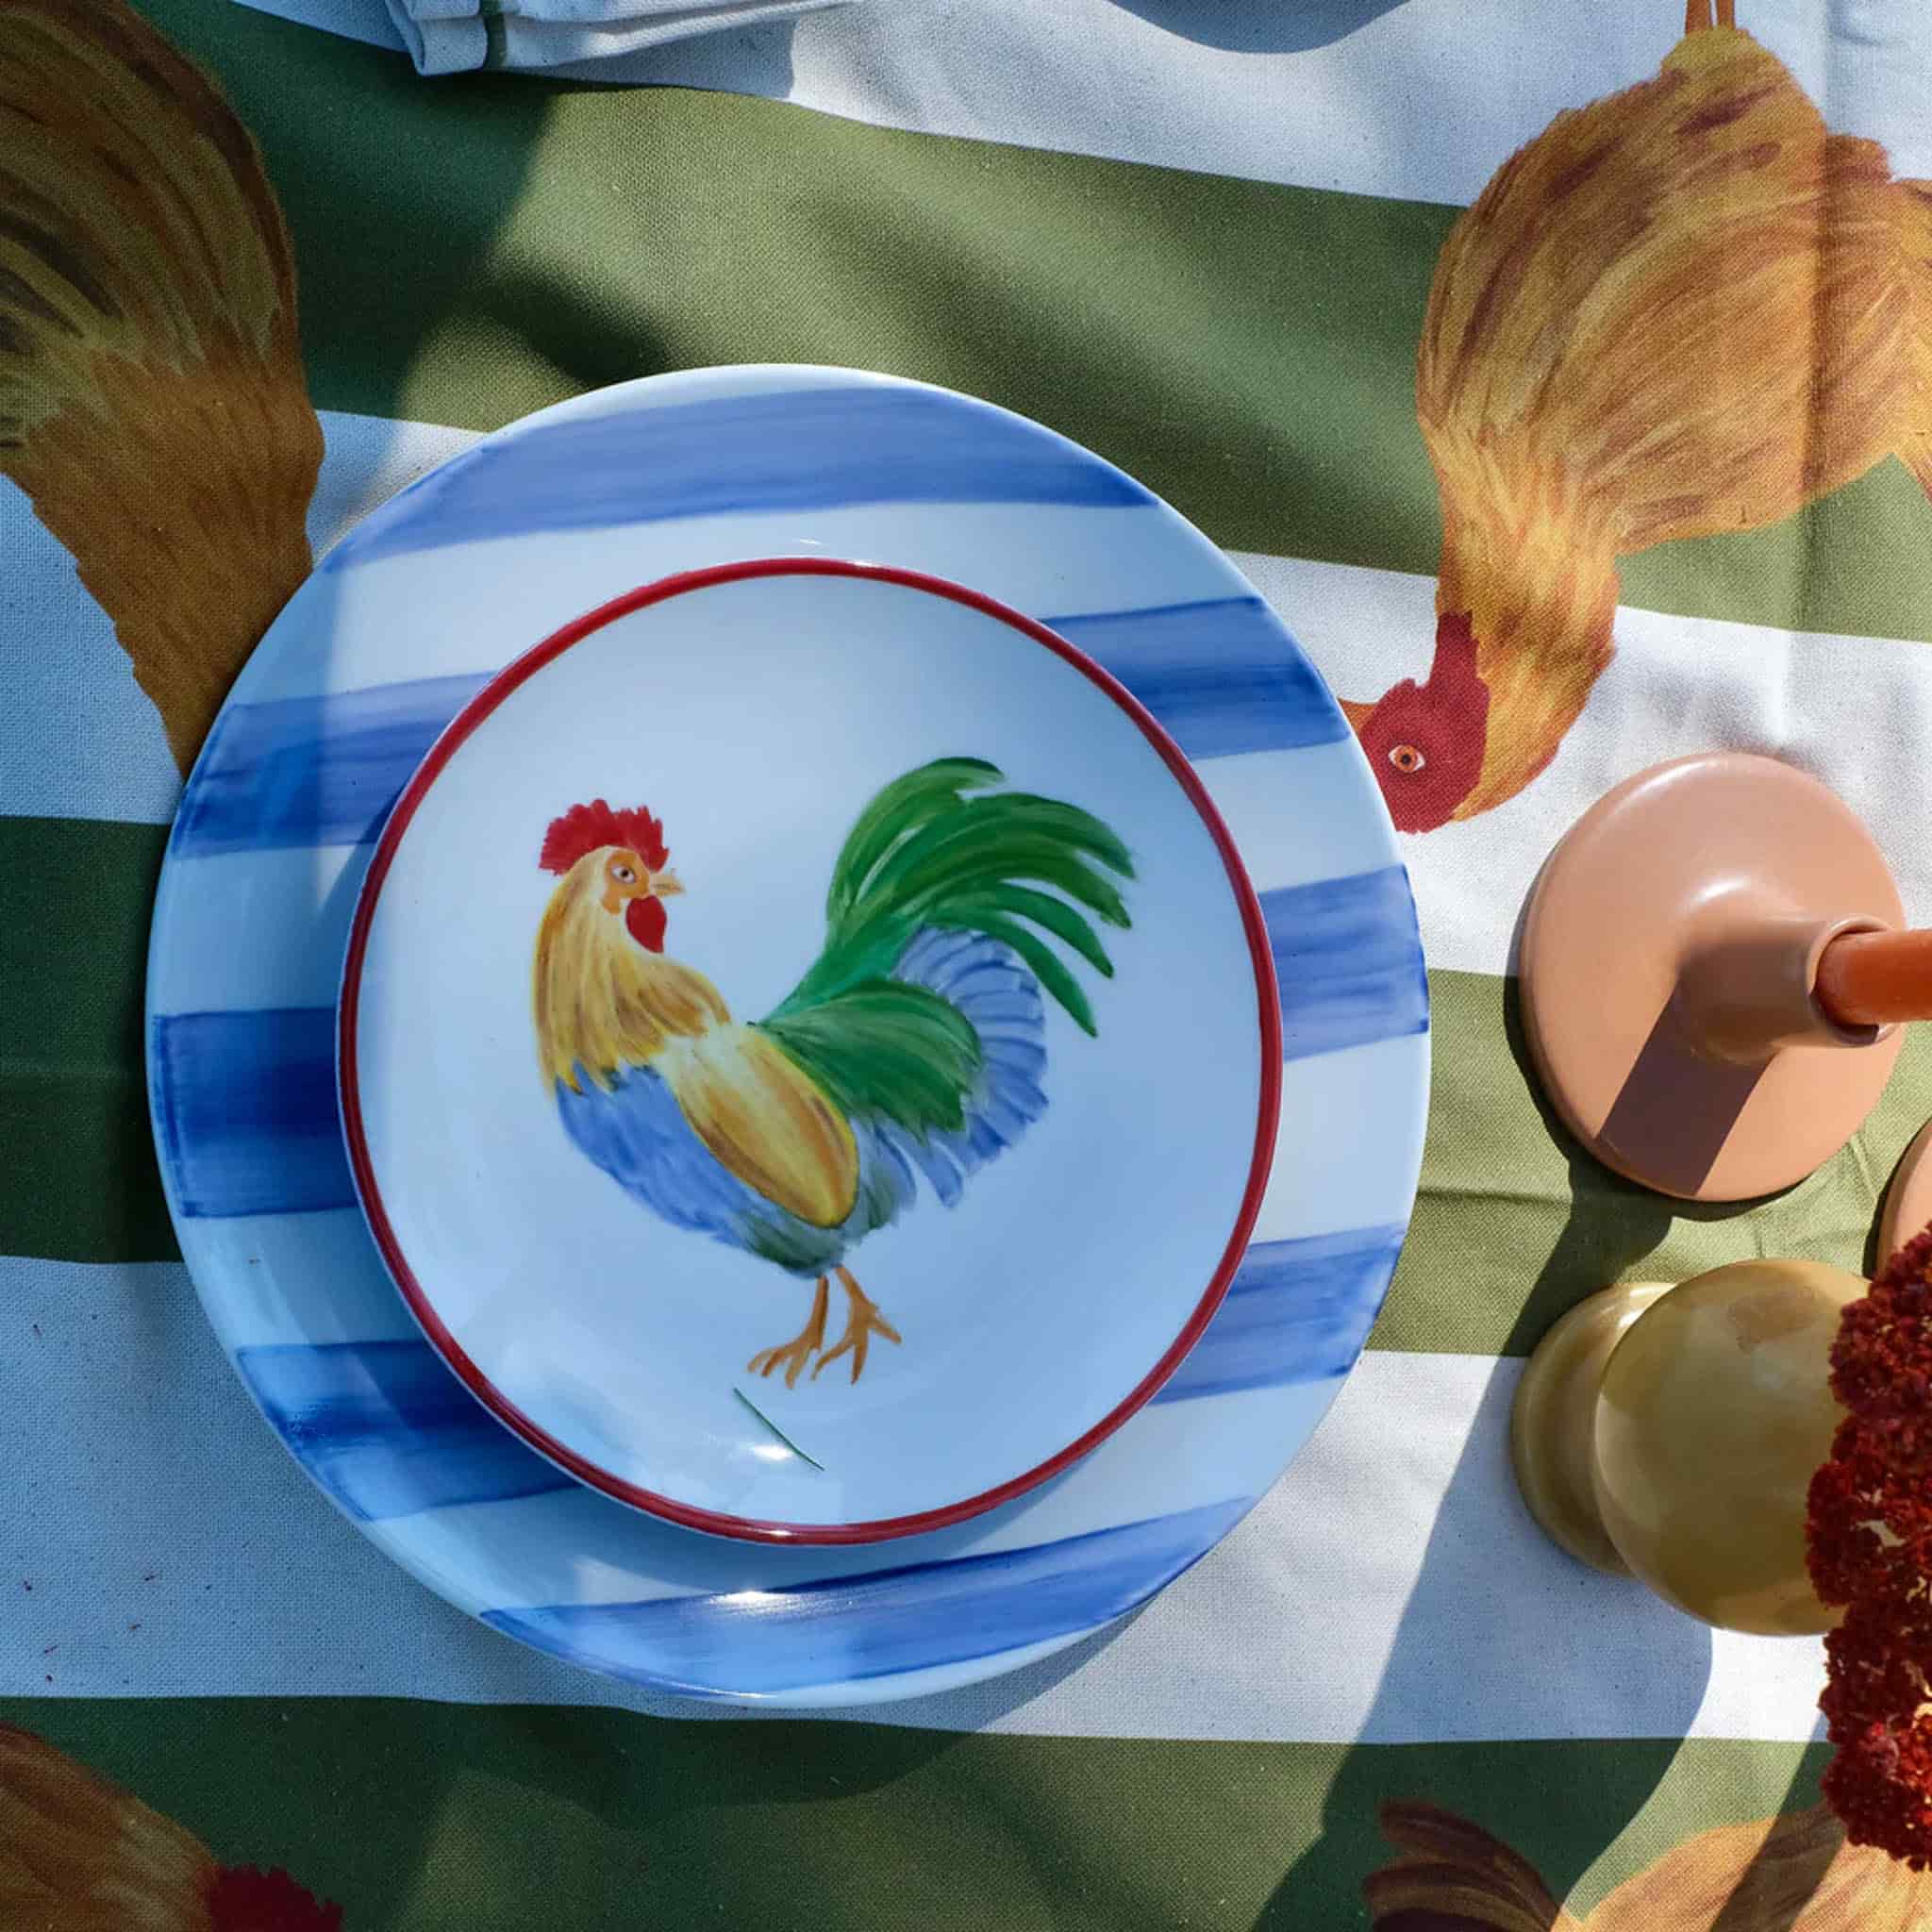 The Platera Pepe Rooster Porcelain Side Plate, 21cm